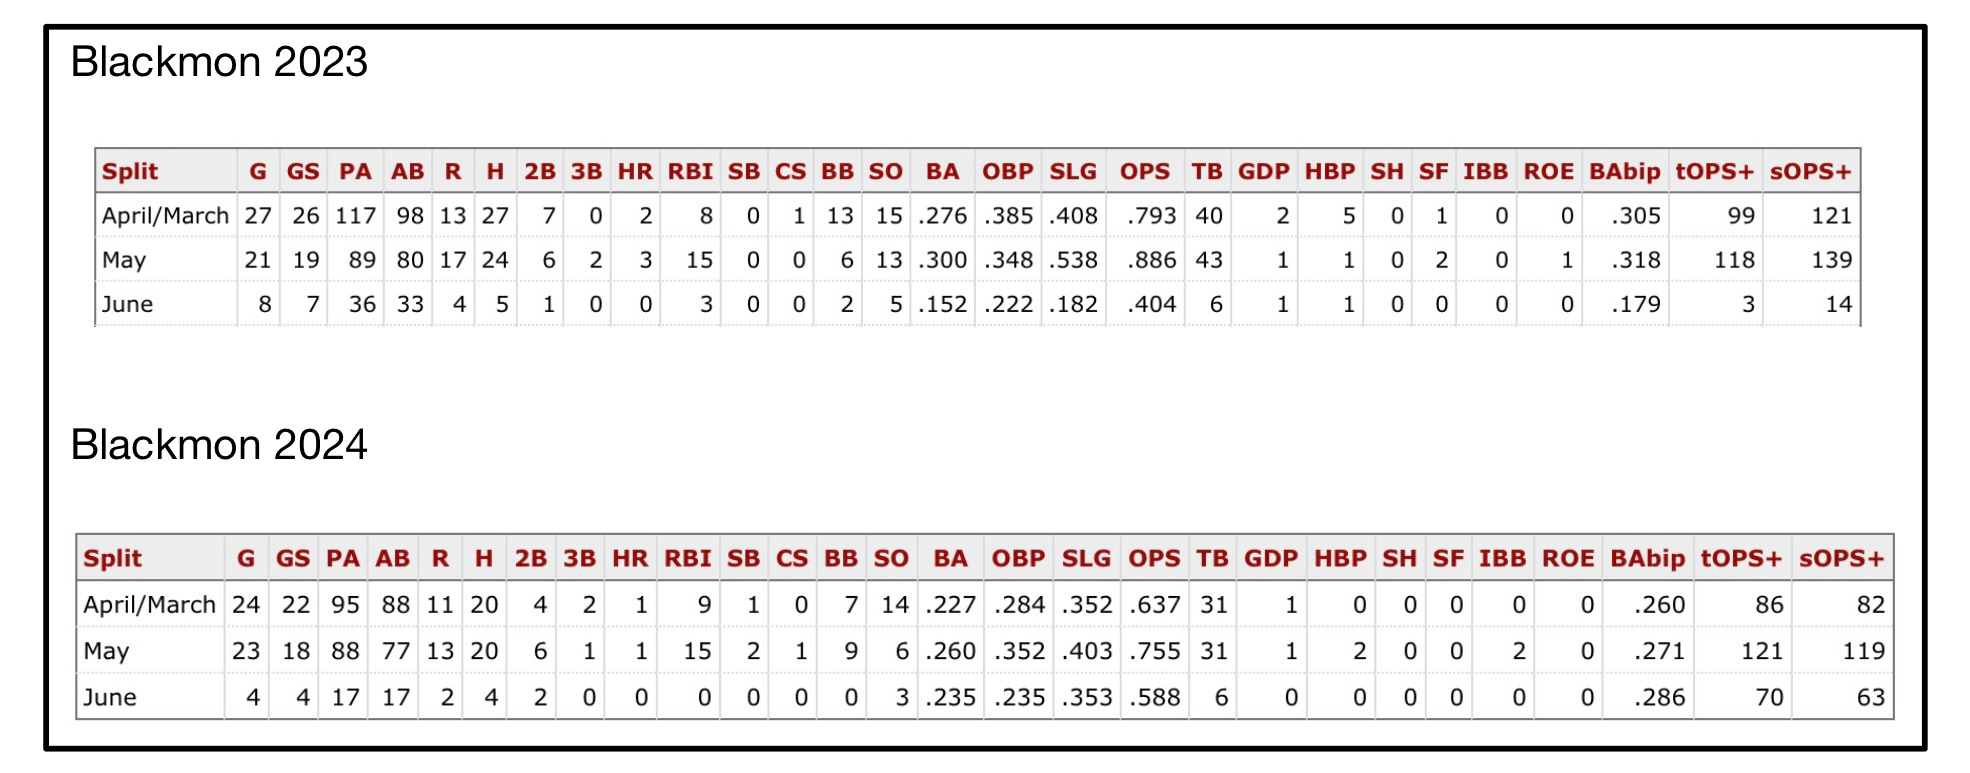 These two tables compare Blackmon’s seasons. Relevant data discussed in the text.